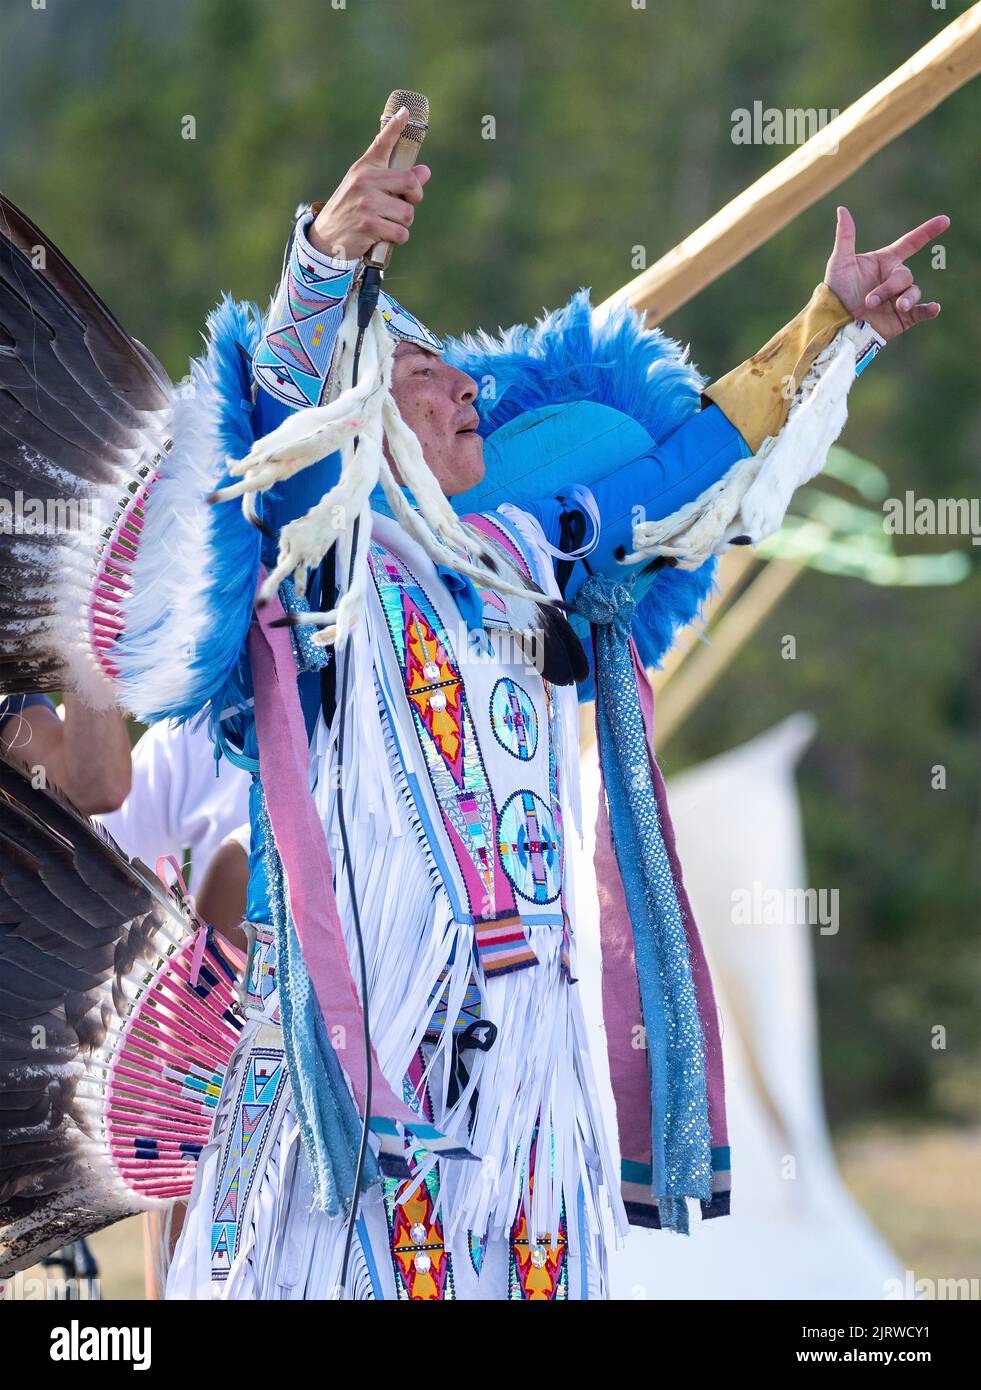 Madison Junction, United States of America. 23 August, 2022. Apsaalooke tribe rapper and thunder dancer Superman performs at the All Nations Teepee Village to mark the 150th anniversary of Yellowstone National Park August 23, 2022 in Madison Junction, Montana. The project by Mountain Time Arts features 13 teepee lodges and performances by Native American artists that signify a new era of Indigenous inclusion and representation in Yellowstone National Park. Credit: Ashton Hooker/NPS/Alamy Live News Stock Photo